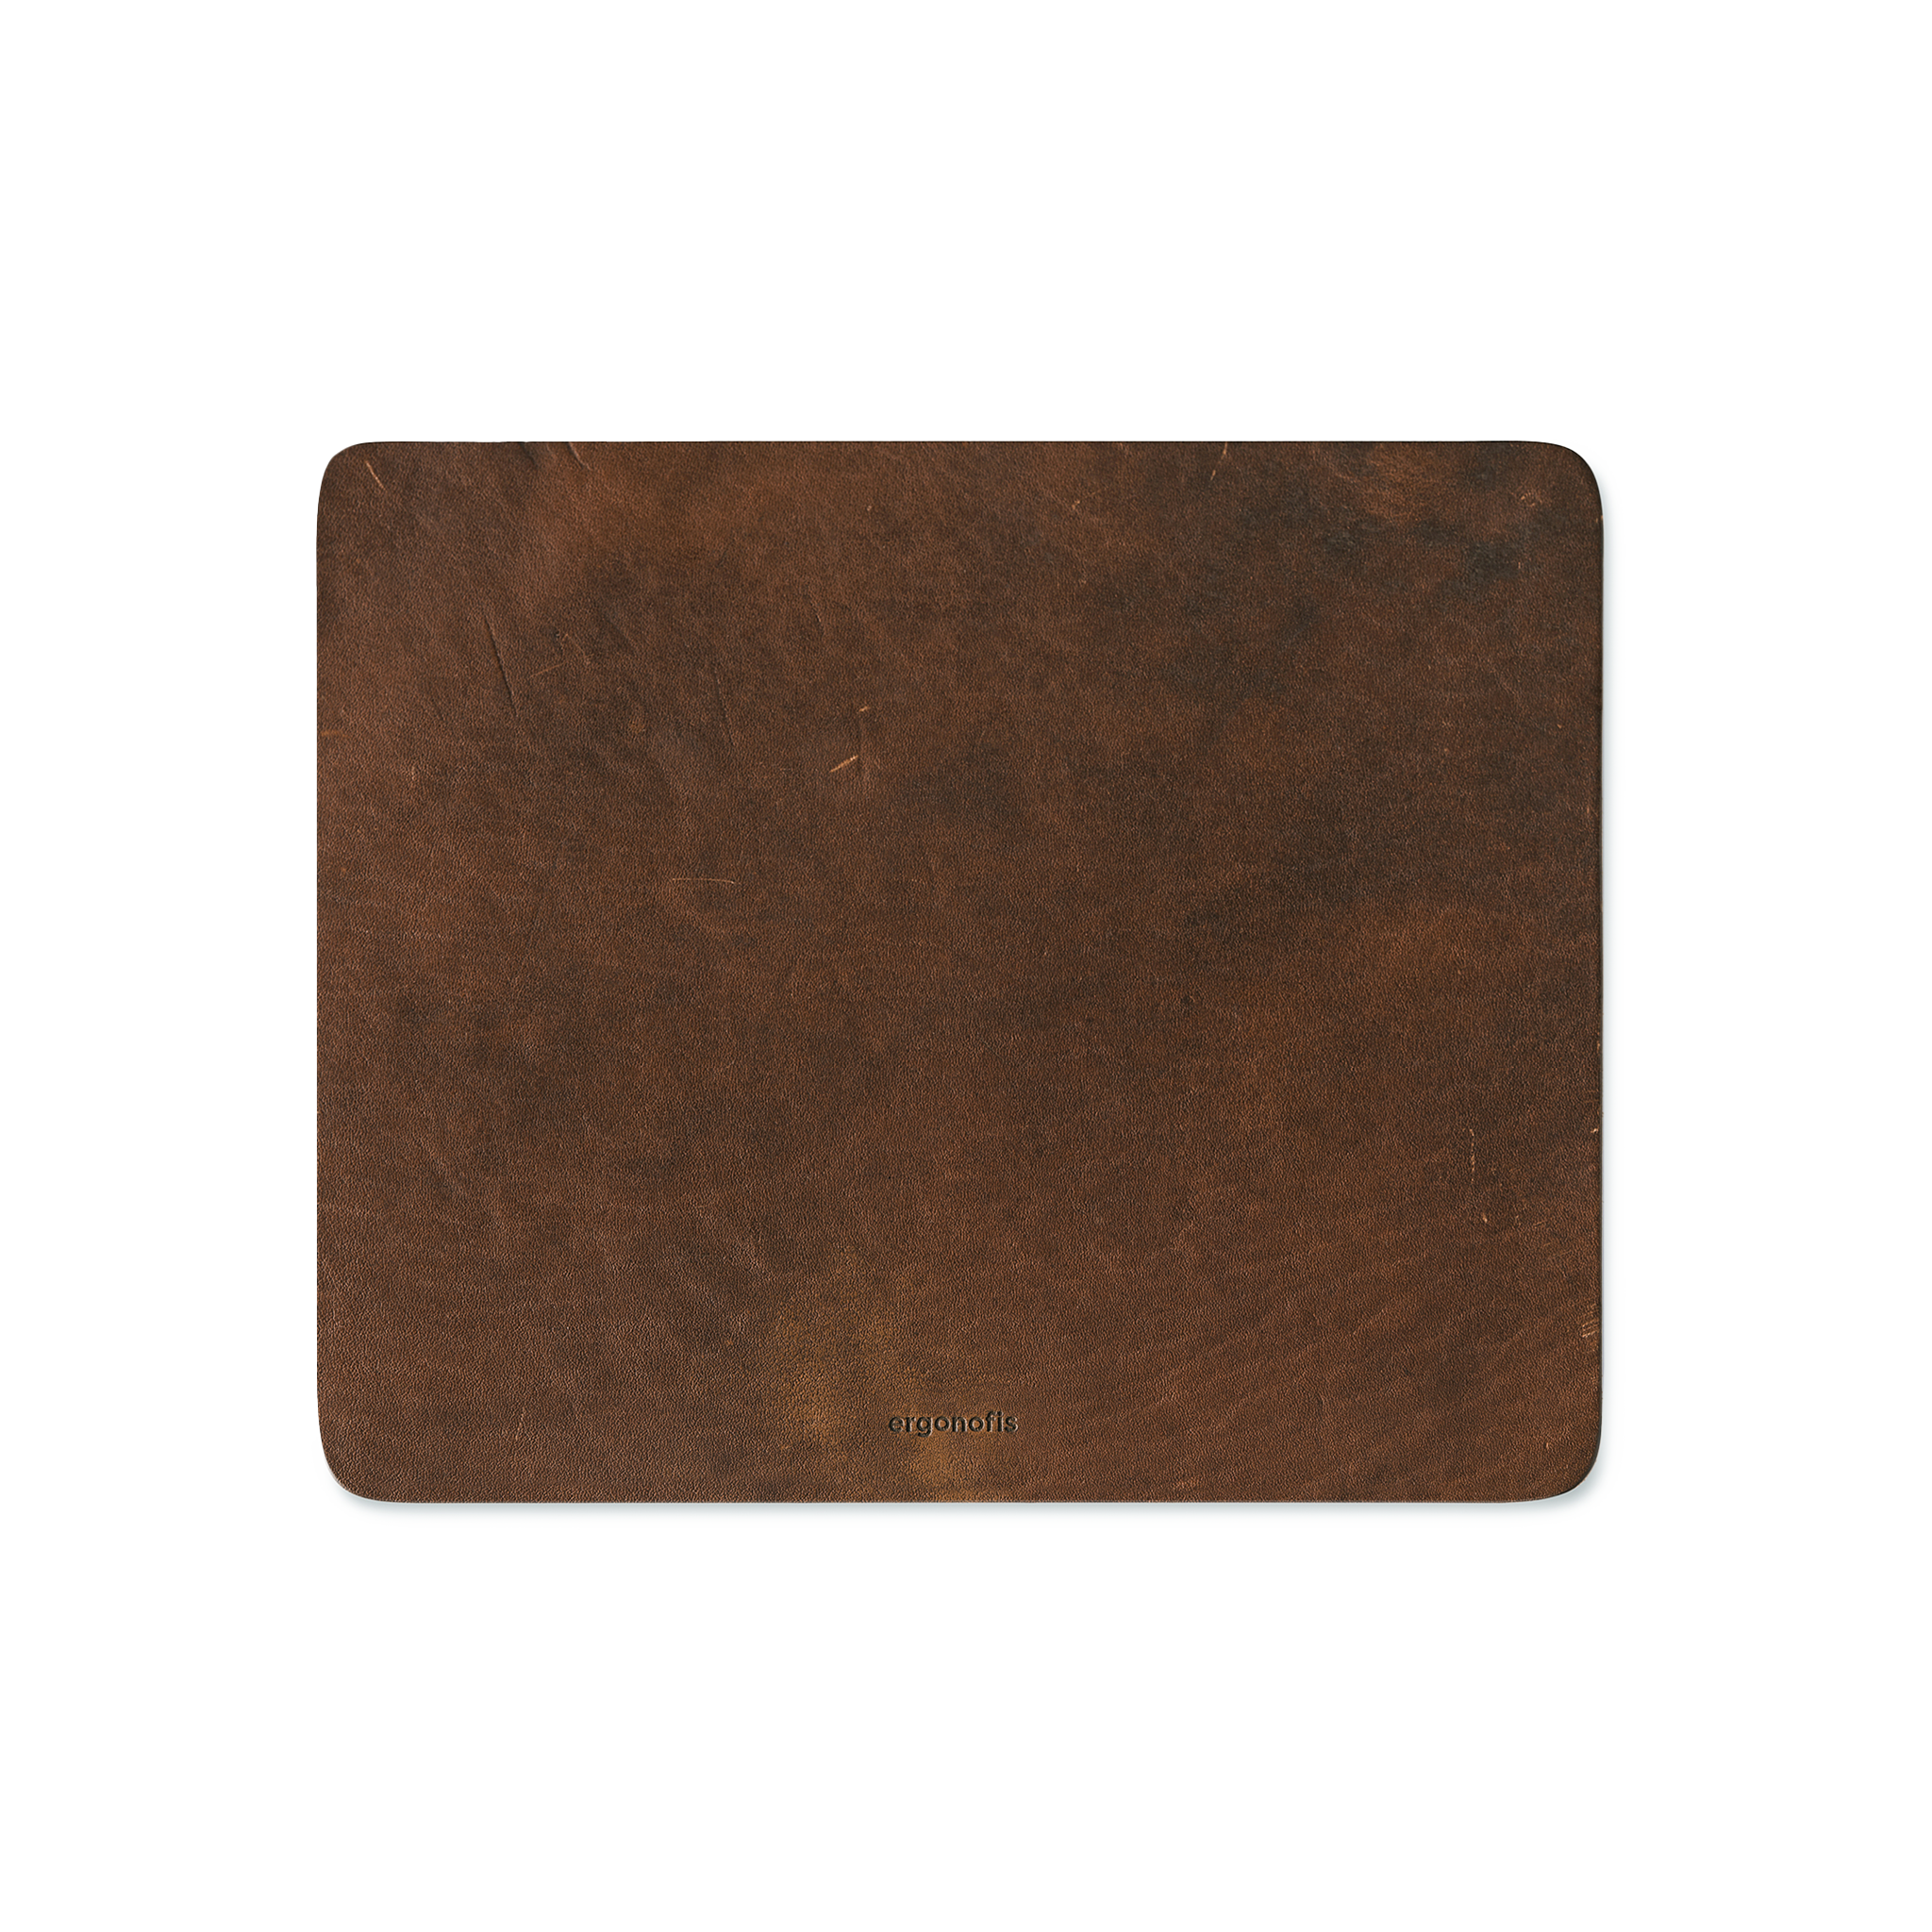 Almost Perfect Leather mouse pad - ergonofis